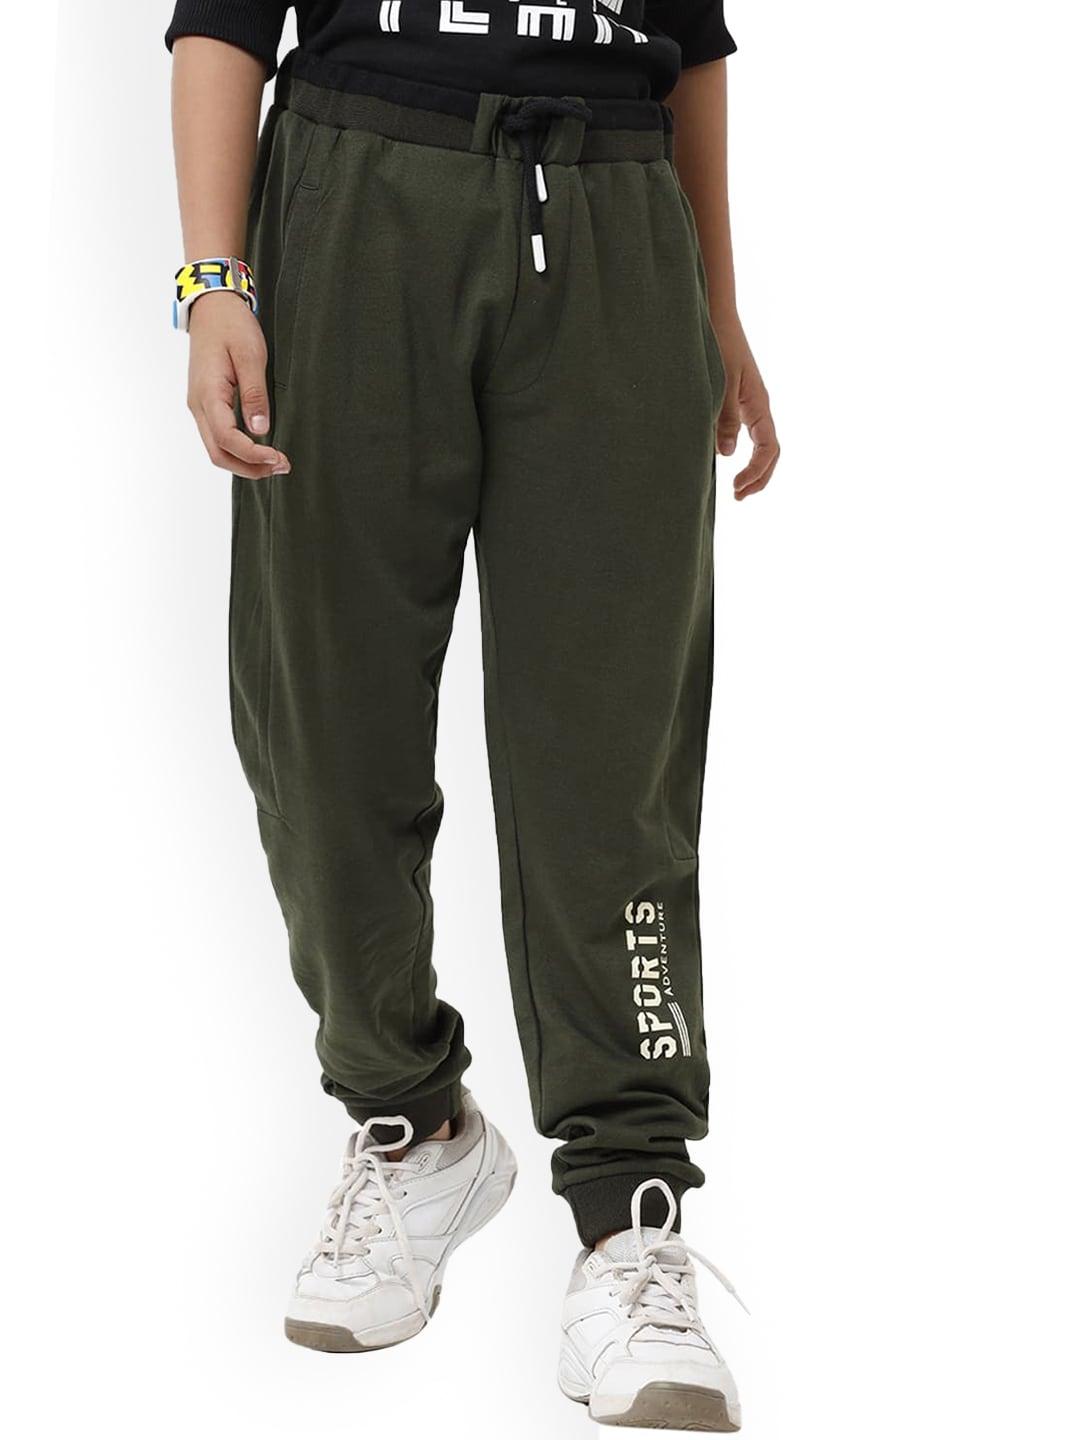 UNDER FOURTEEN ONLY Boys Olive Green Slim Fit Joggers Trousers